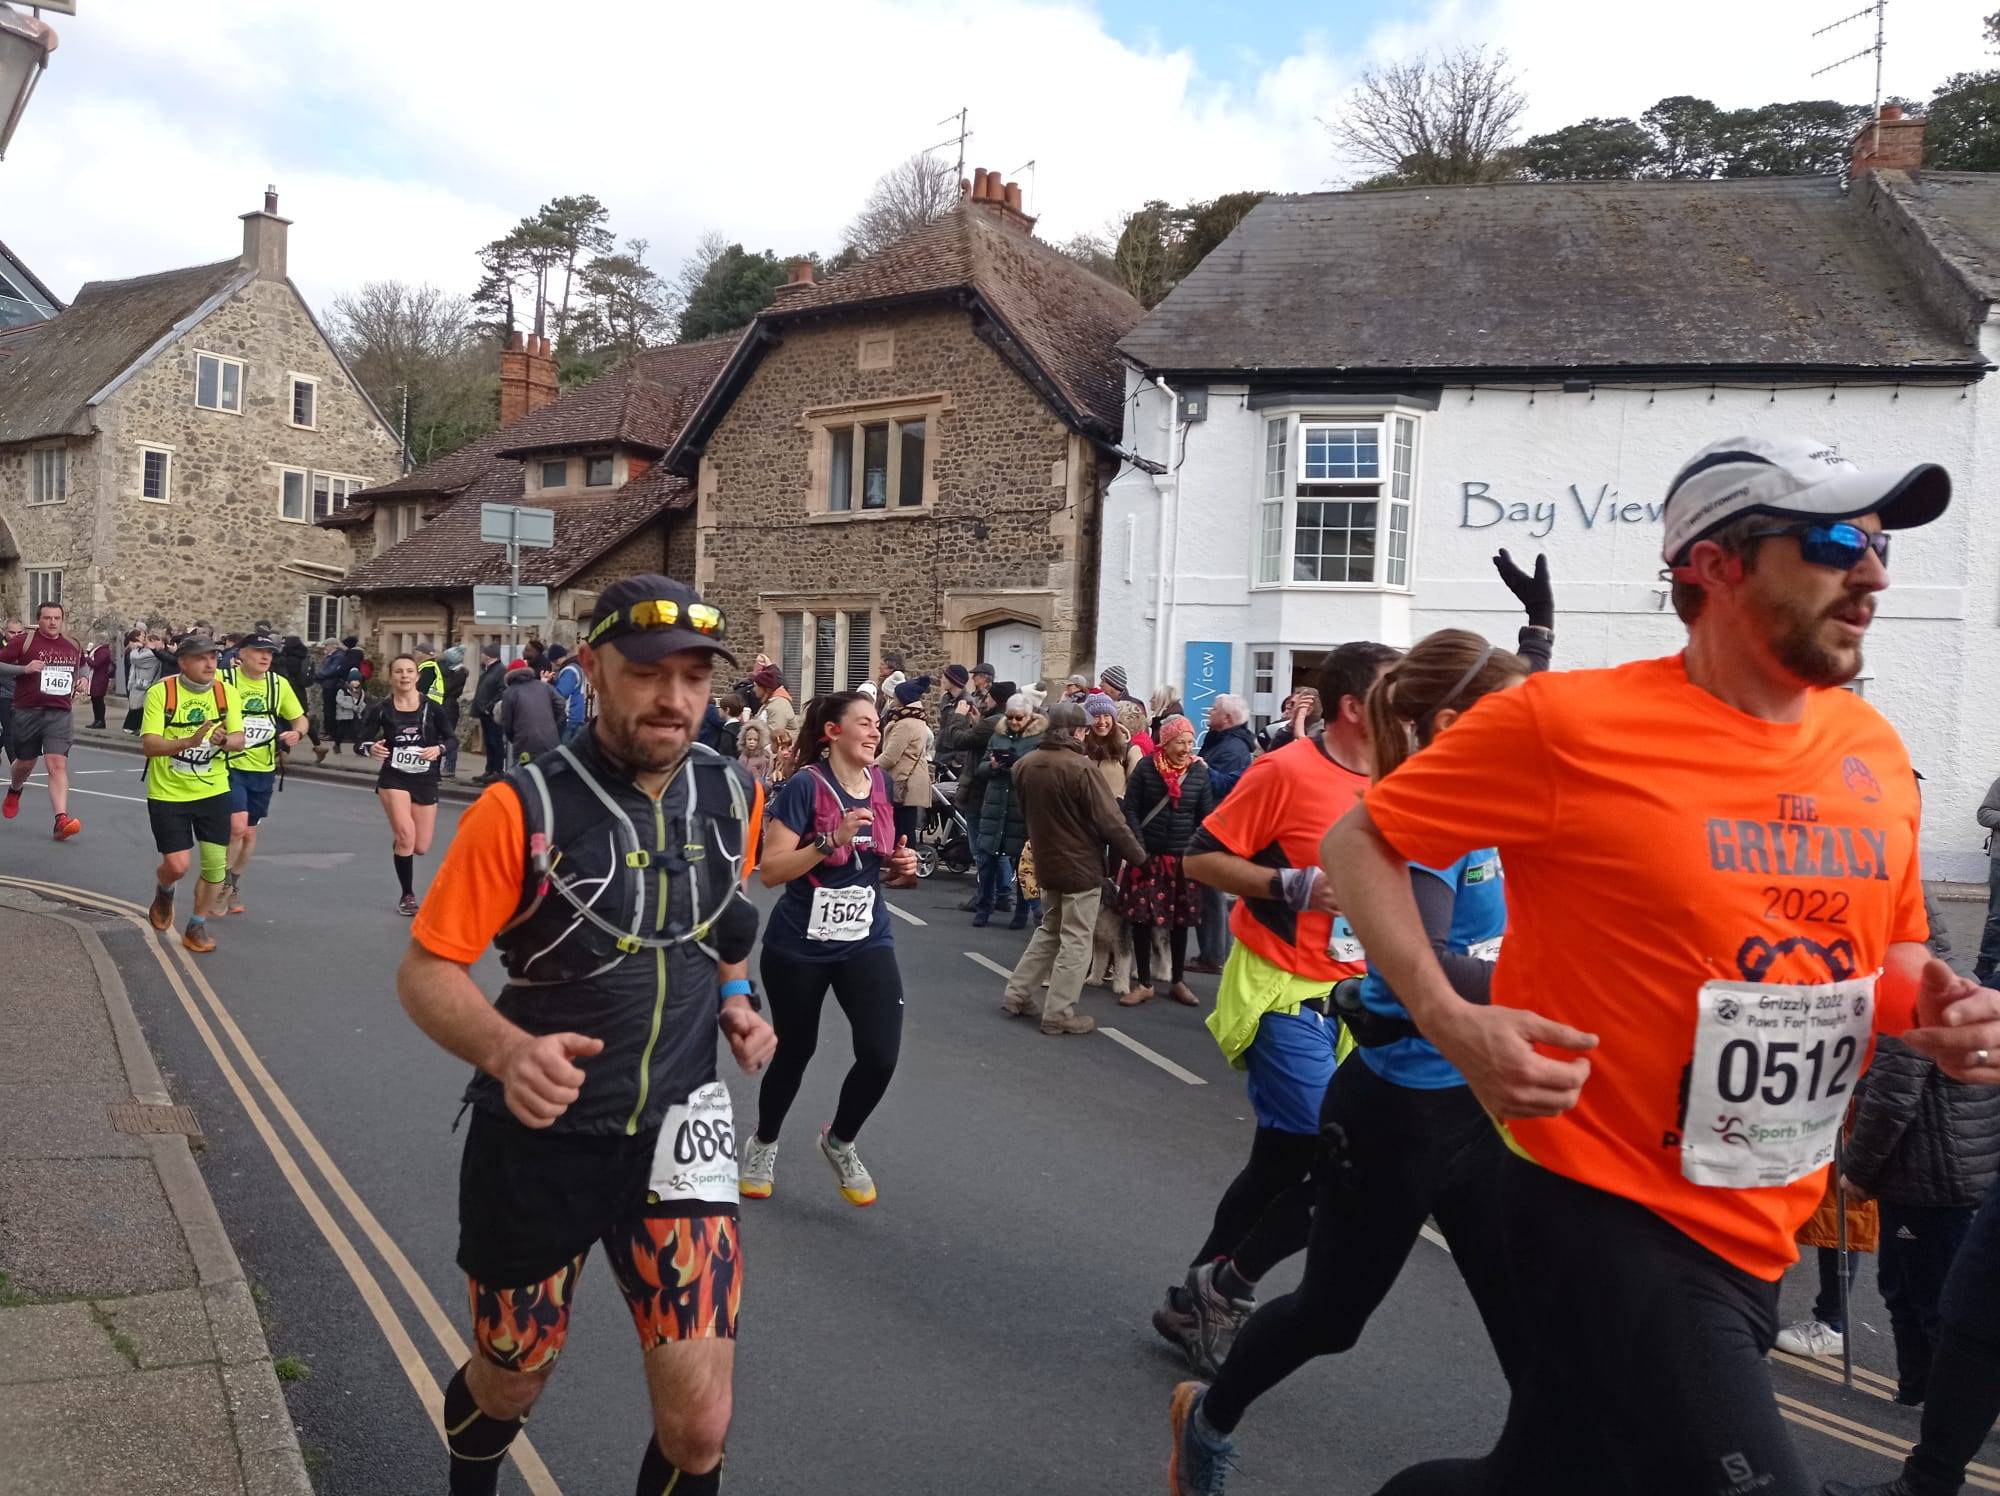 In the village of Beer, the first set of runners storm through